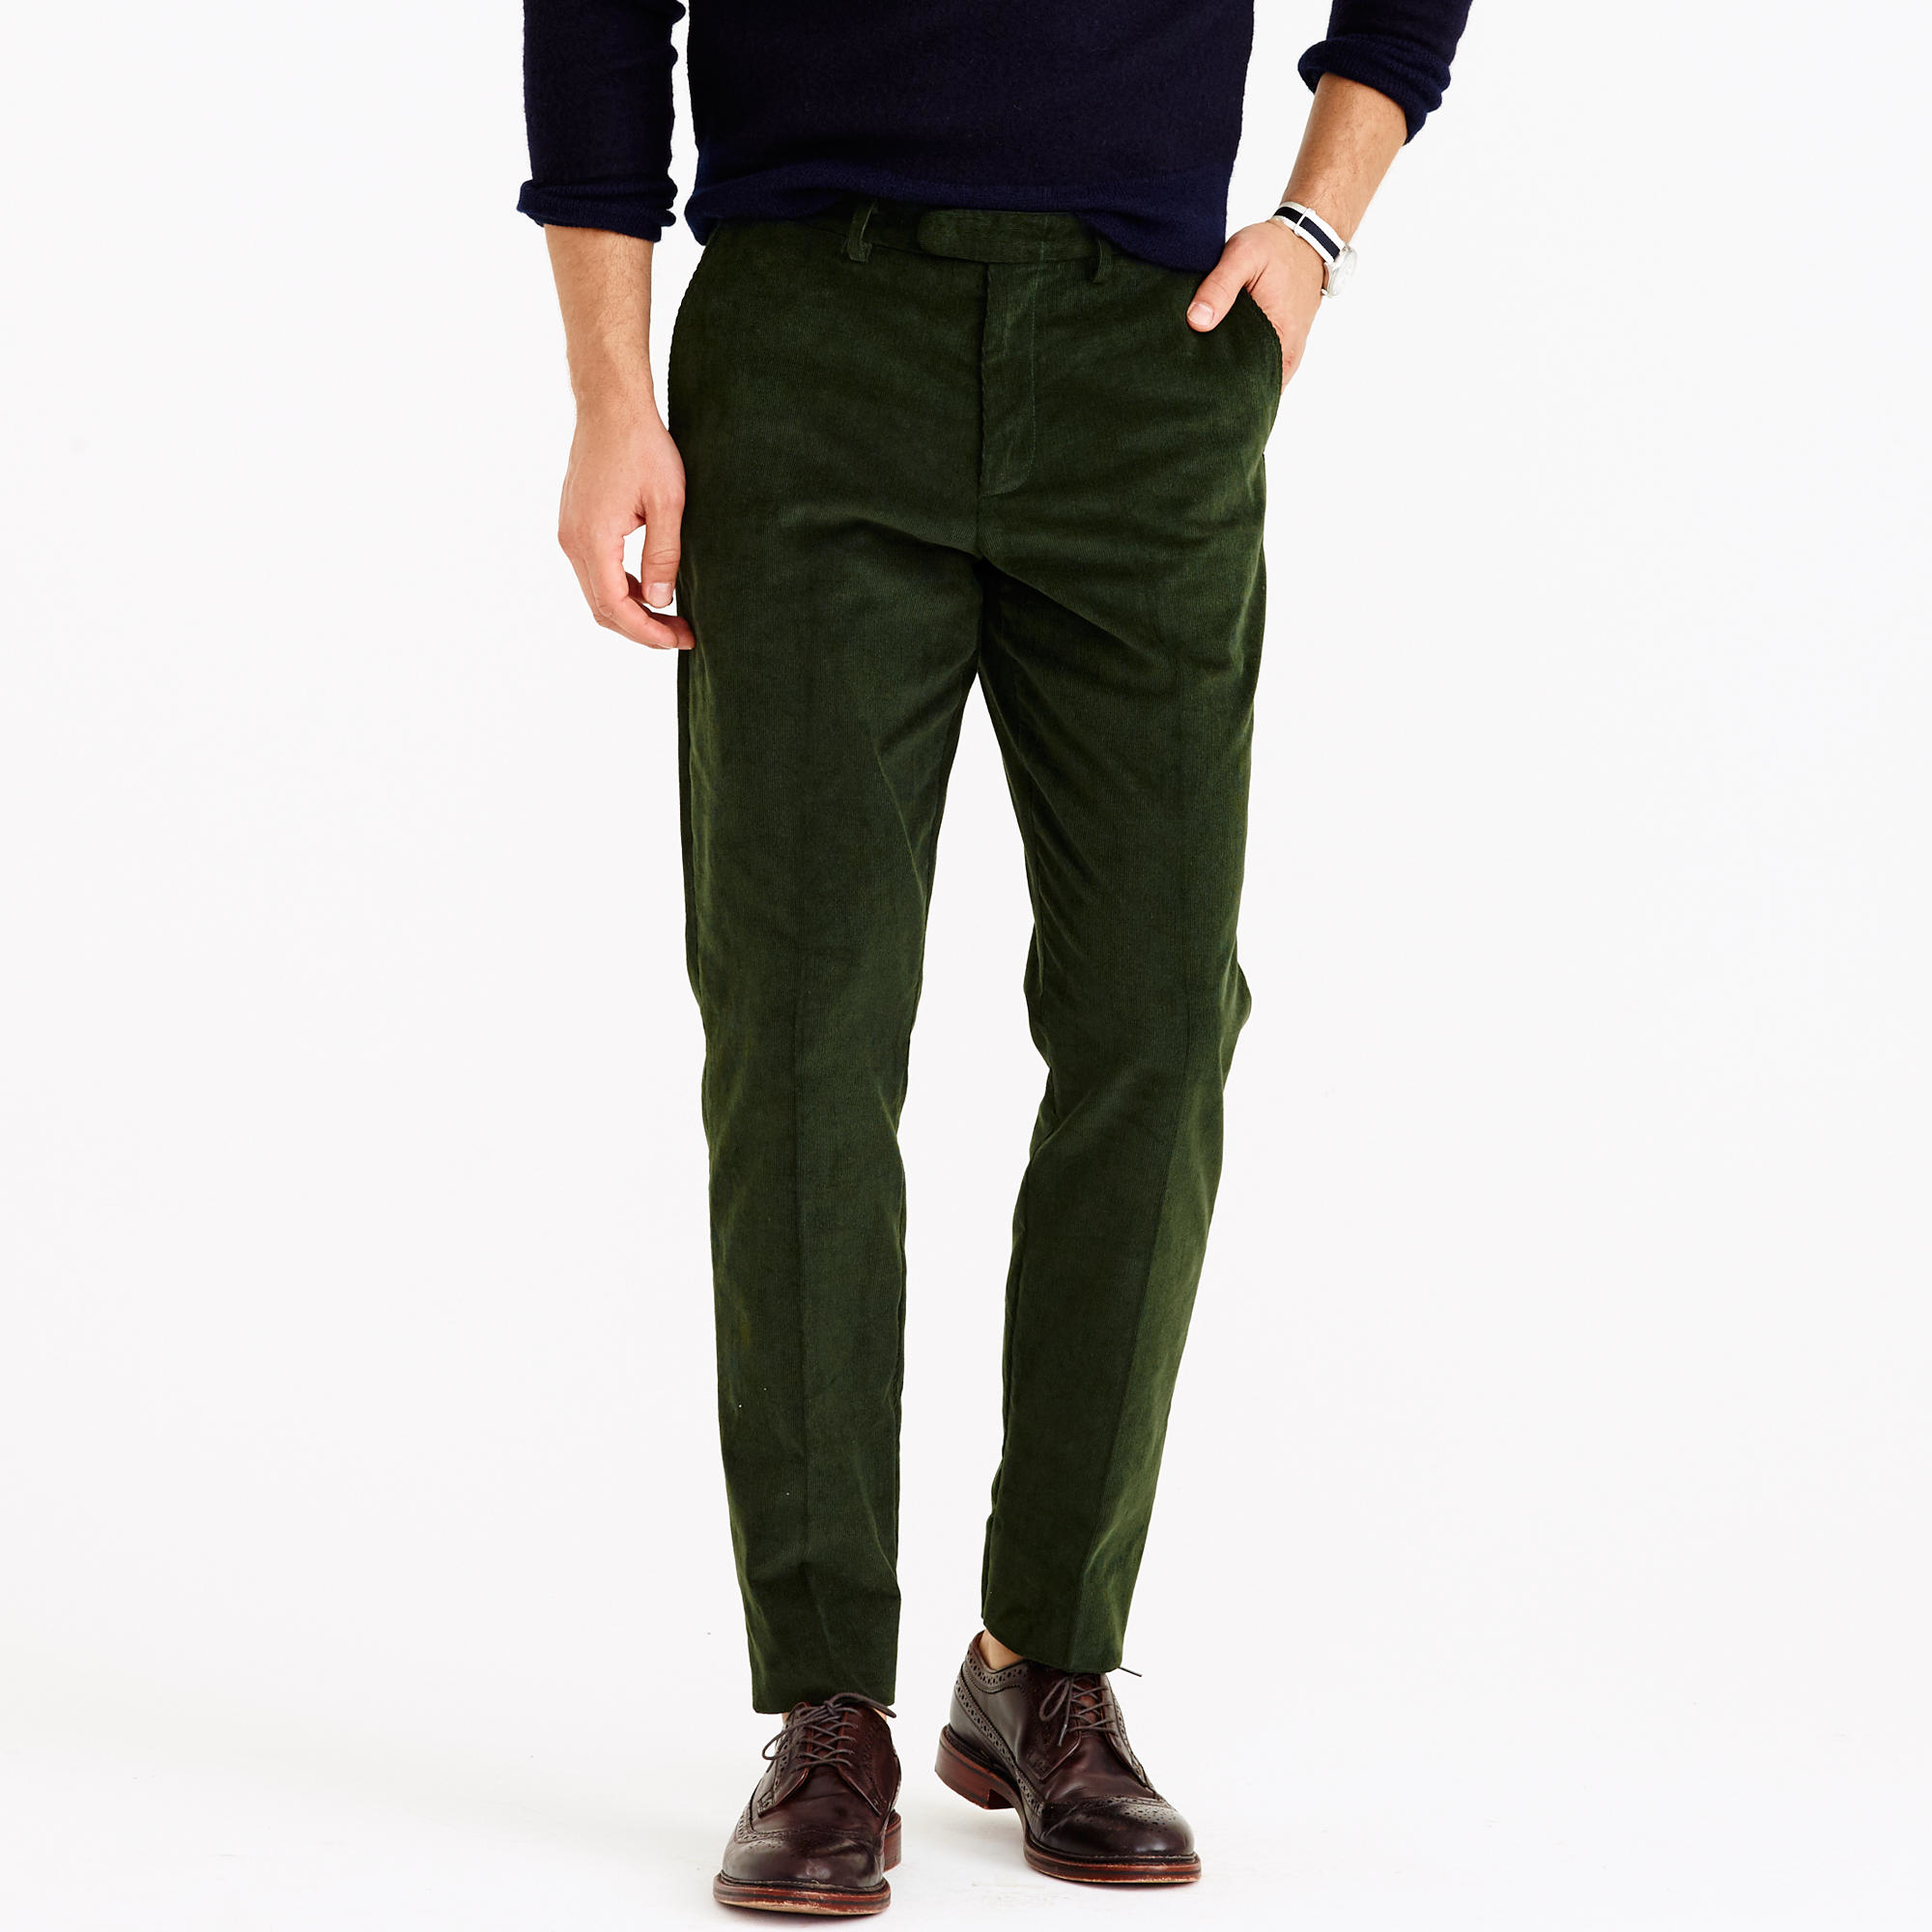 J.Crew Bowery Classic Pant In 18-wale Corduroy in Green for Men - Lyst